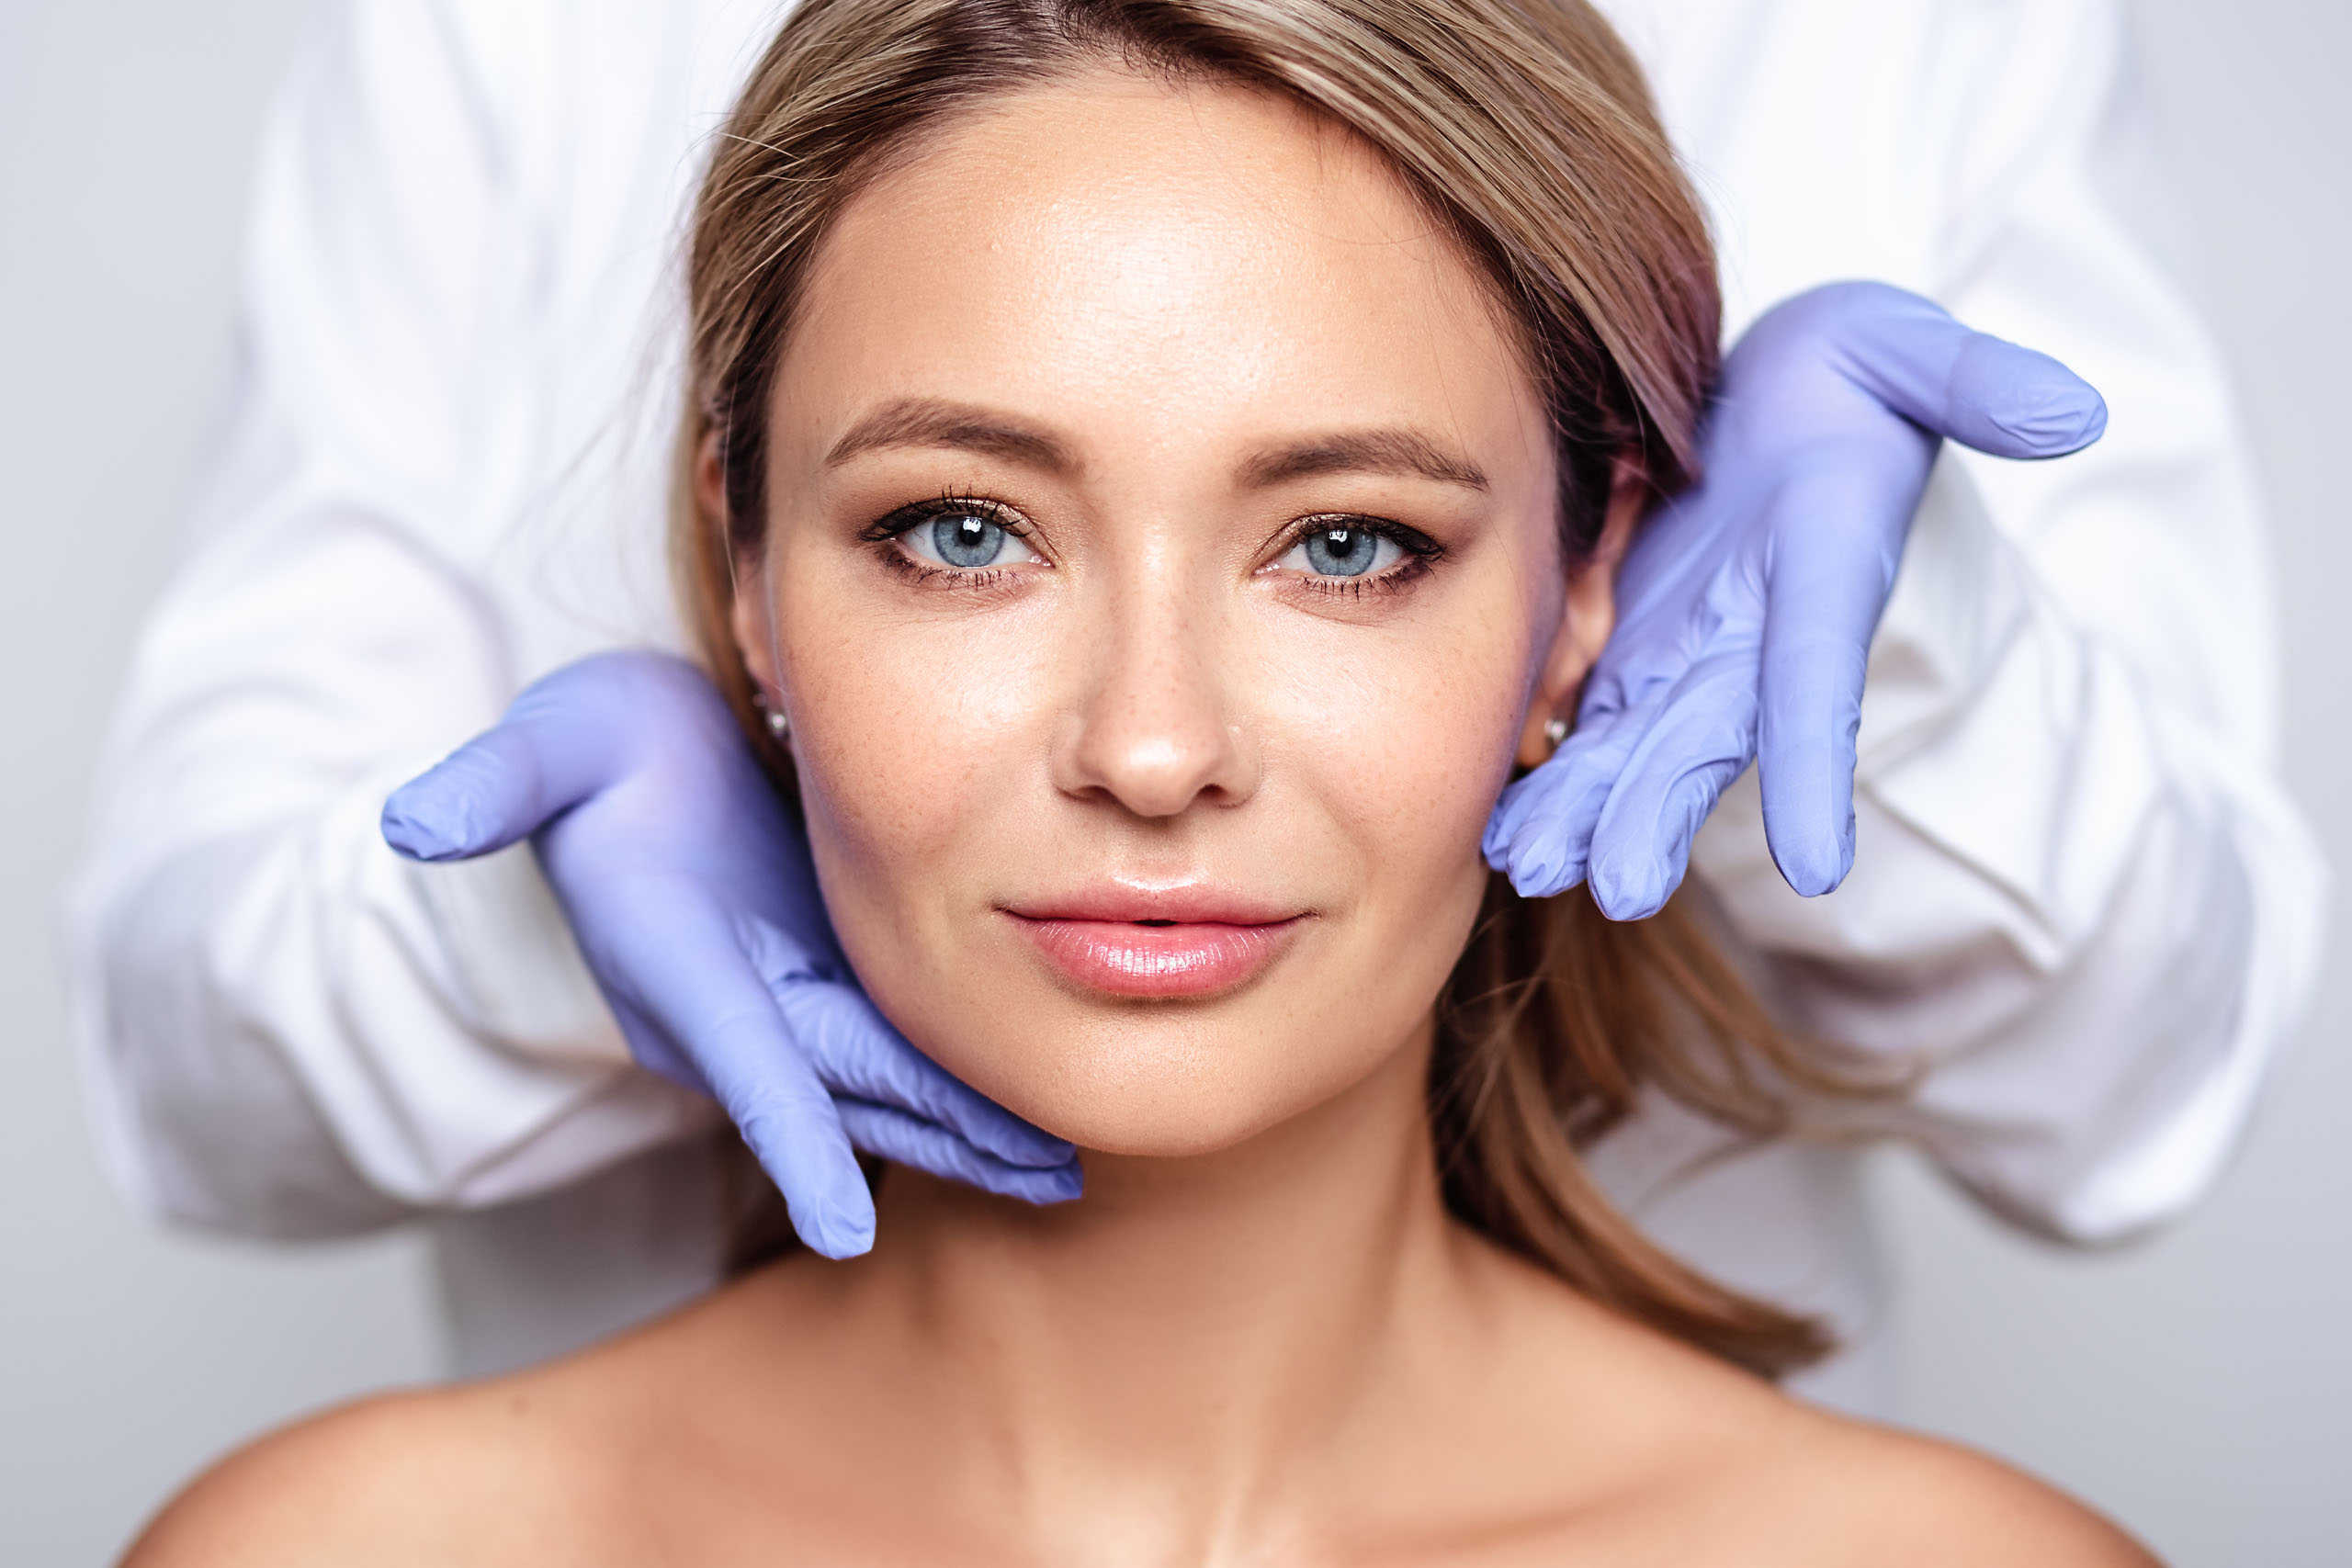 blonde woman with cosmetologyst hands in a gloves, preparation for operation or procedure